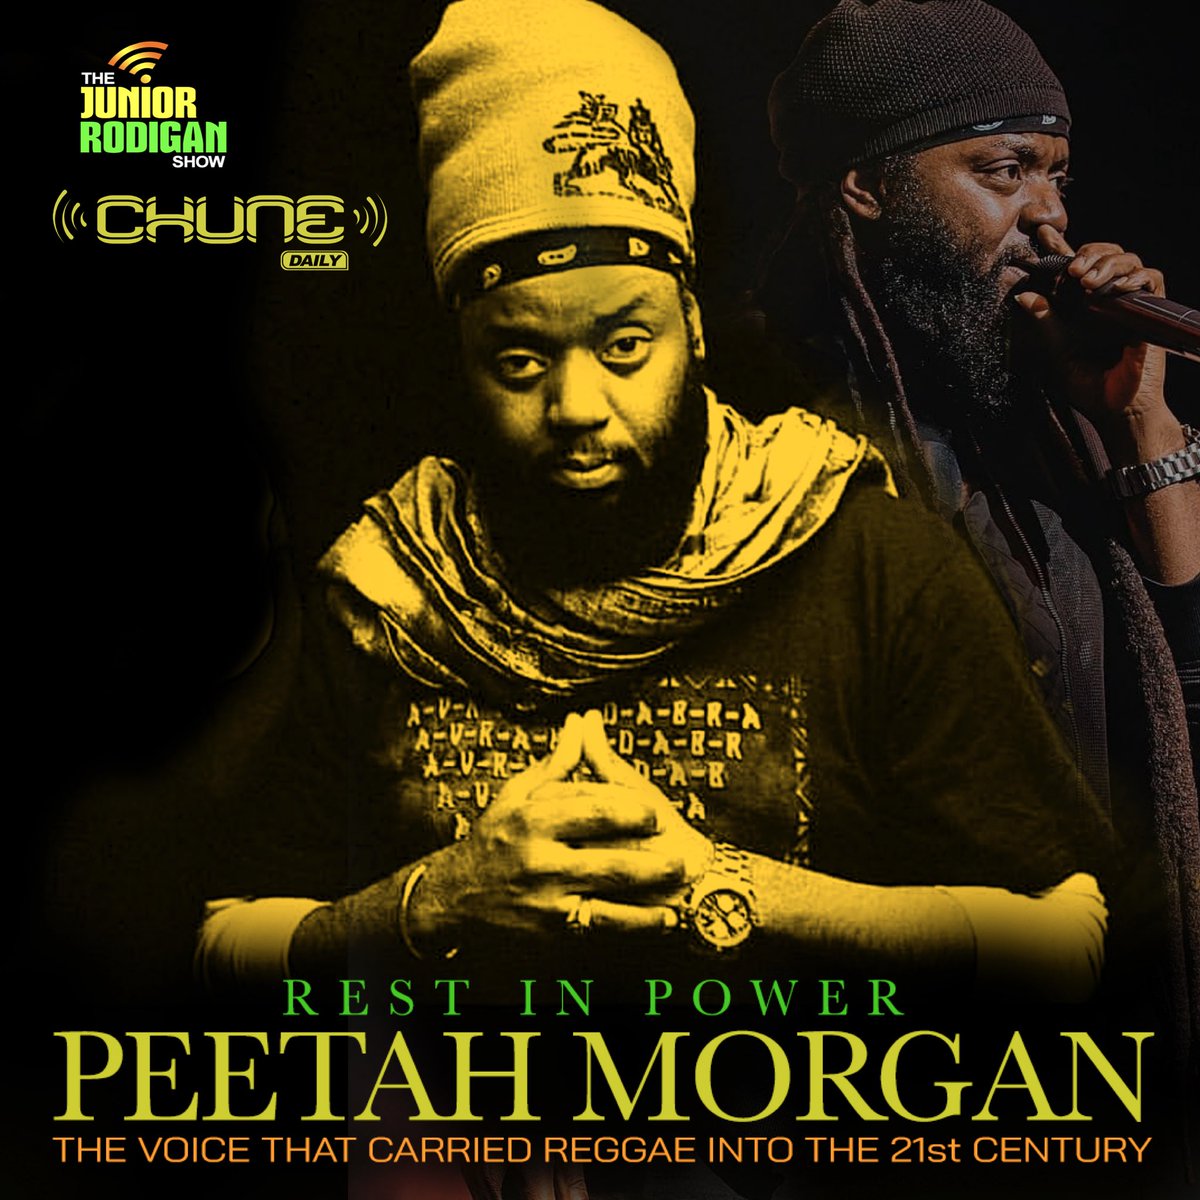 REST IN POWER #PeetahMorgan 👑🇯🇲🎶 So deeply saddened to hear of the passing of legendary lead singer of @morganheritage Deepest condlences to @grampsmorgan @lukesmorgan @UnaMorgan @mojomorgan and the entire family, musical colleagues and millions of fans worldwide MASSIVE LOSS